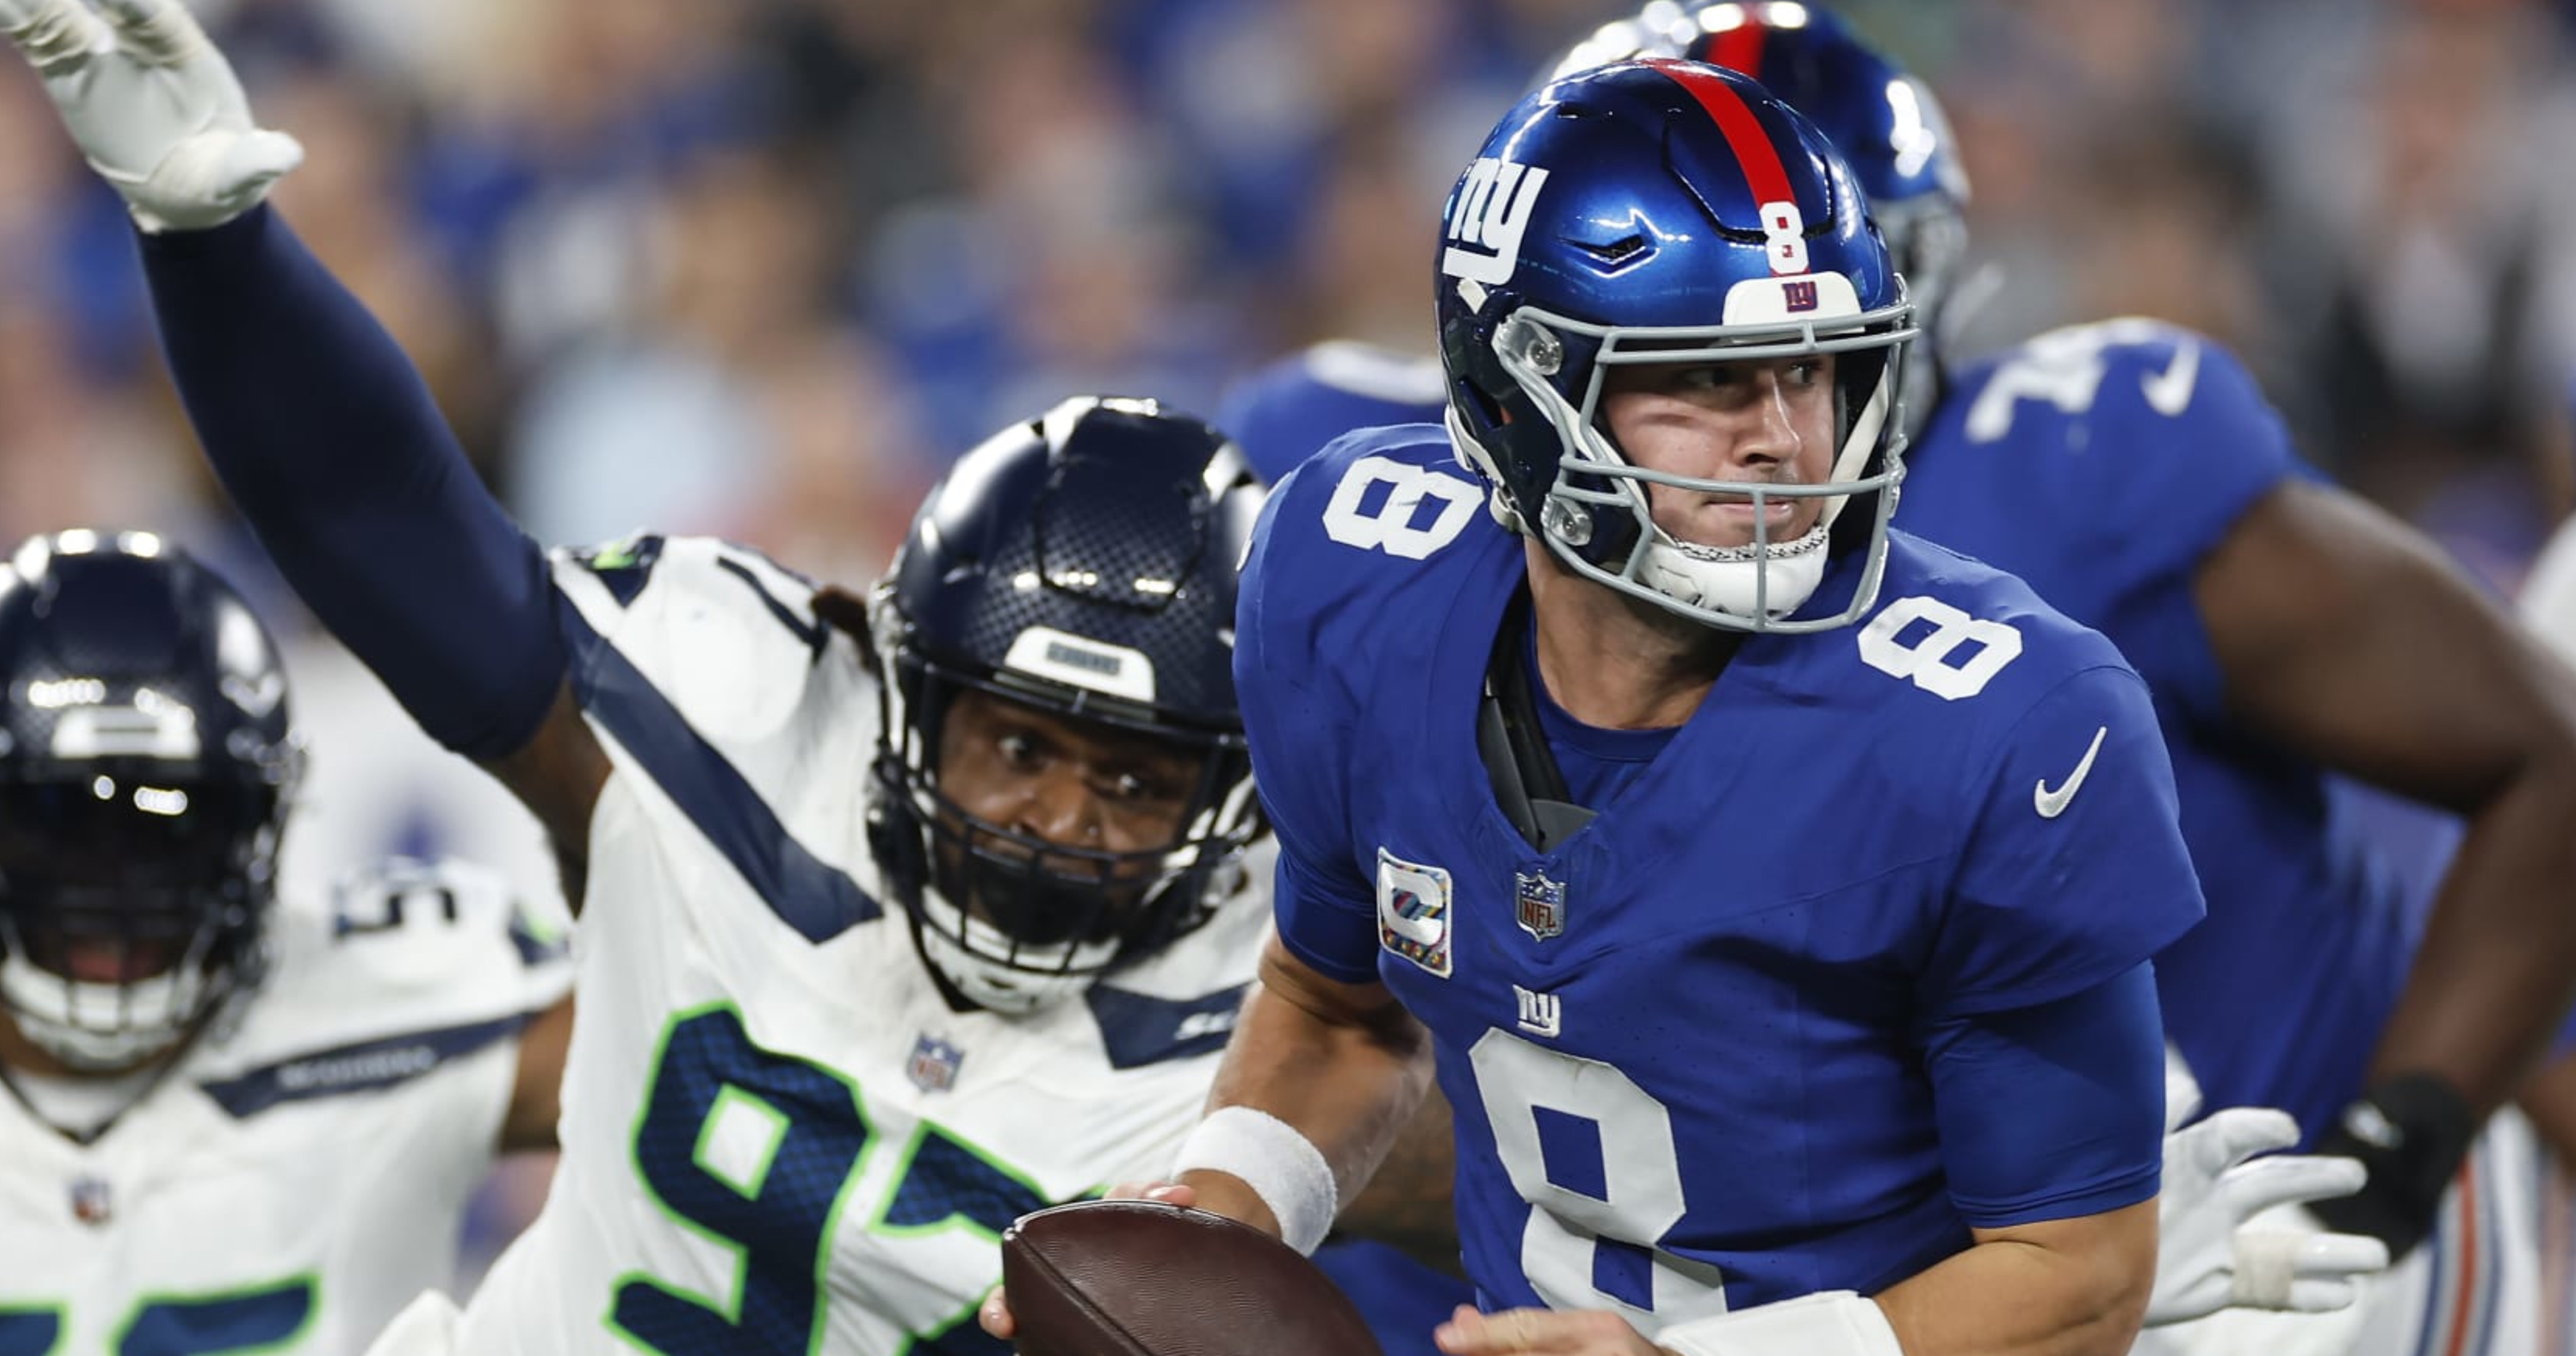 Seahawks 24 vs 3 Giants summary, stats, scores and highlights